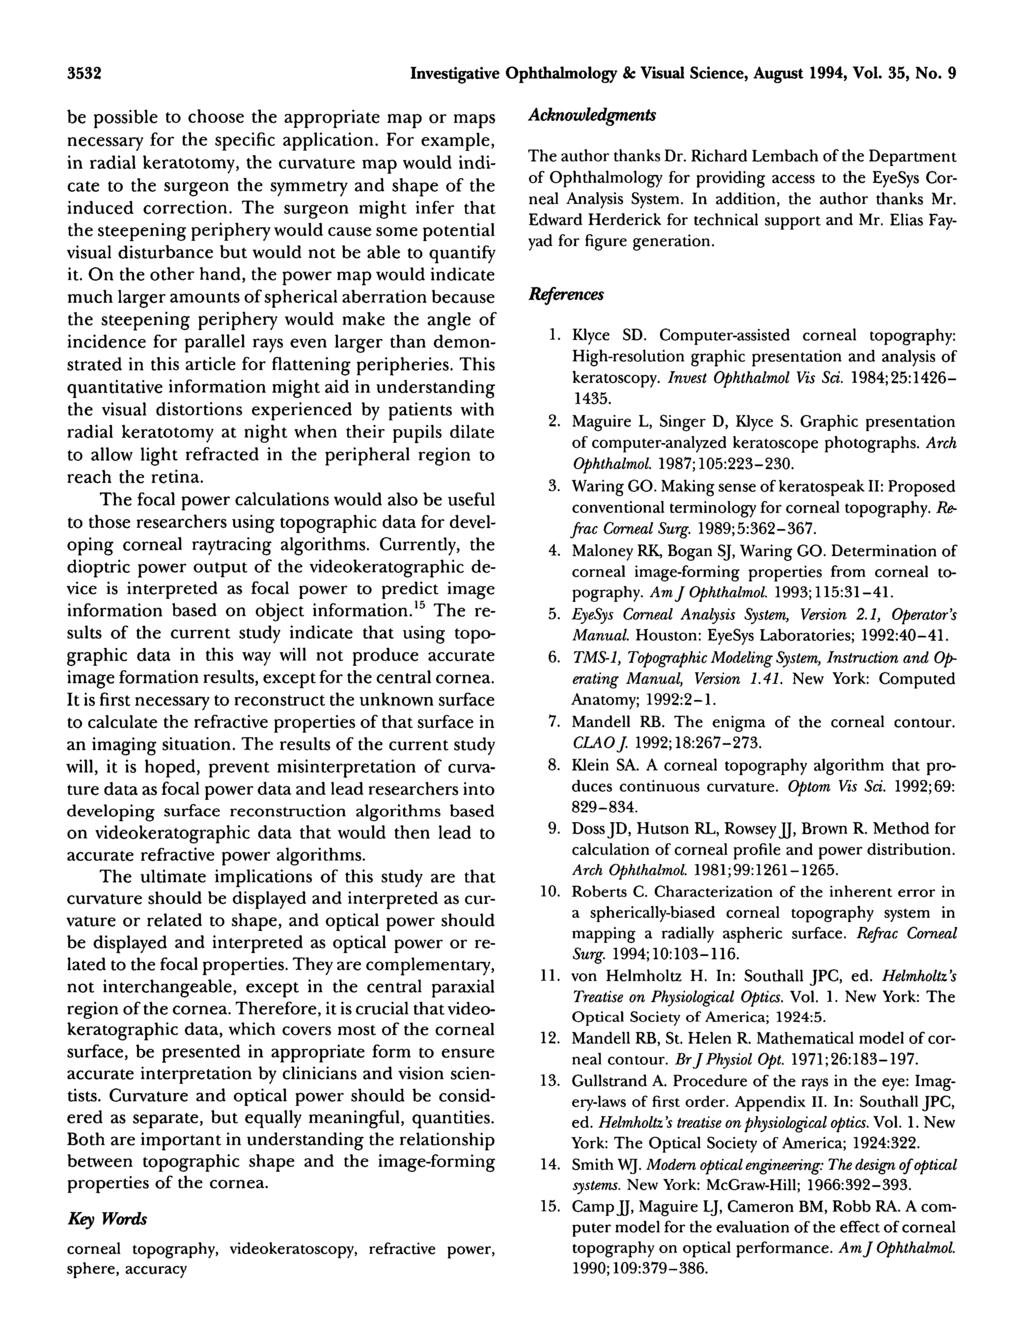 3532 Investigative Ophthalmology & Visual Science, August 1994, Vol. 35, No. 9 be possible to choose the appropriate map or maps necessary for the specific application.